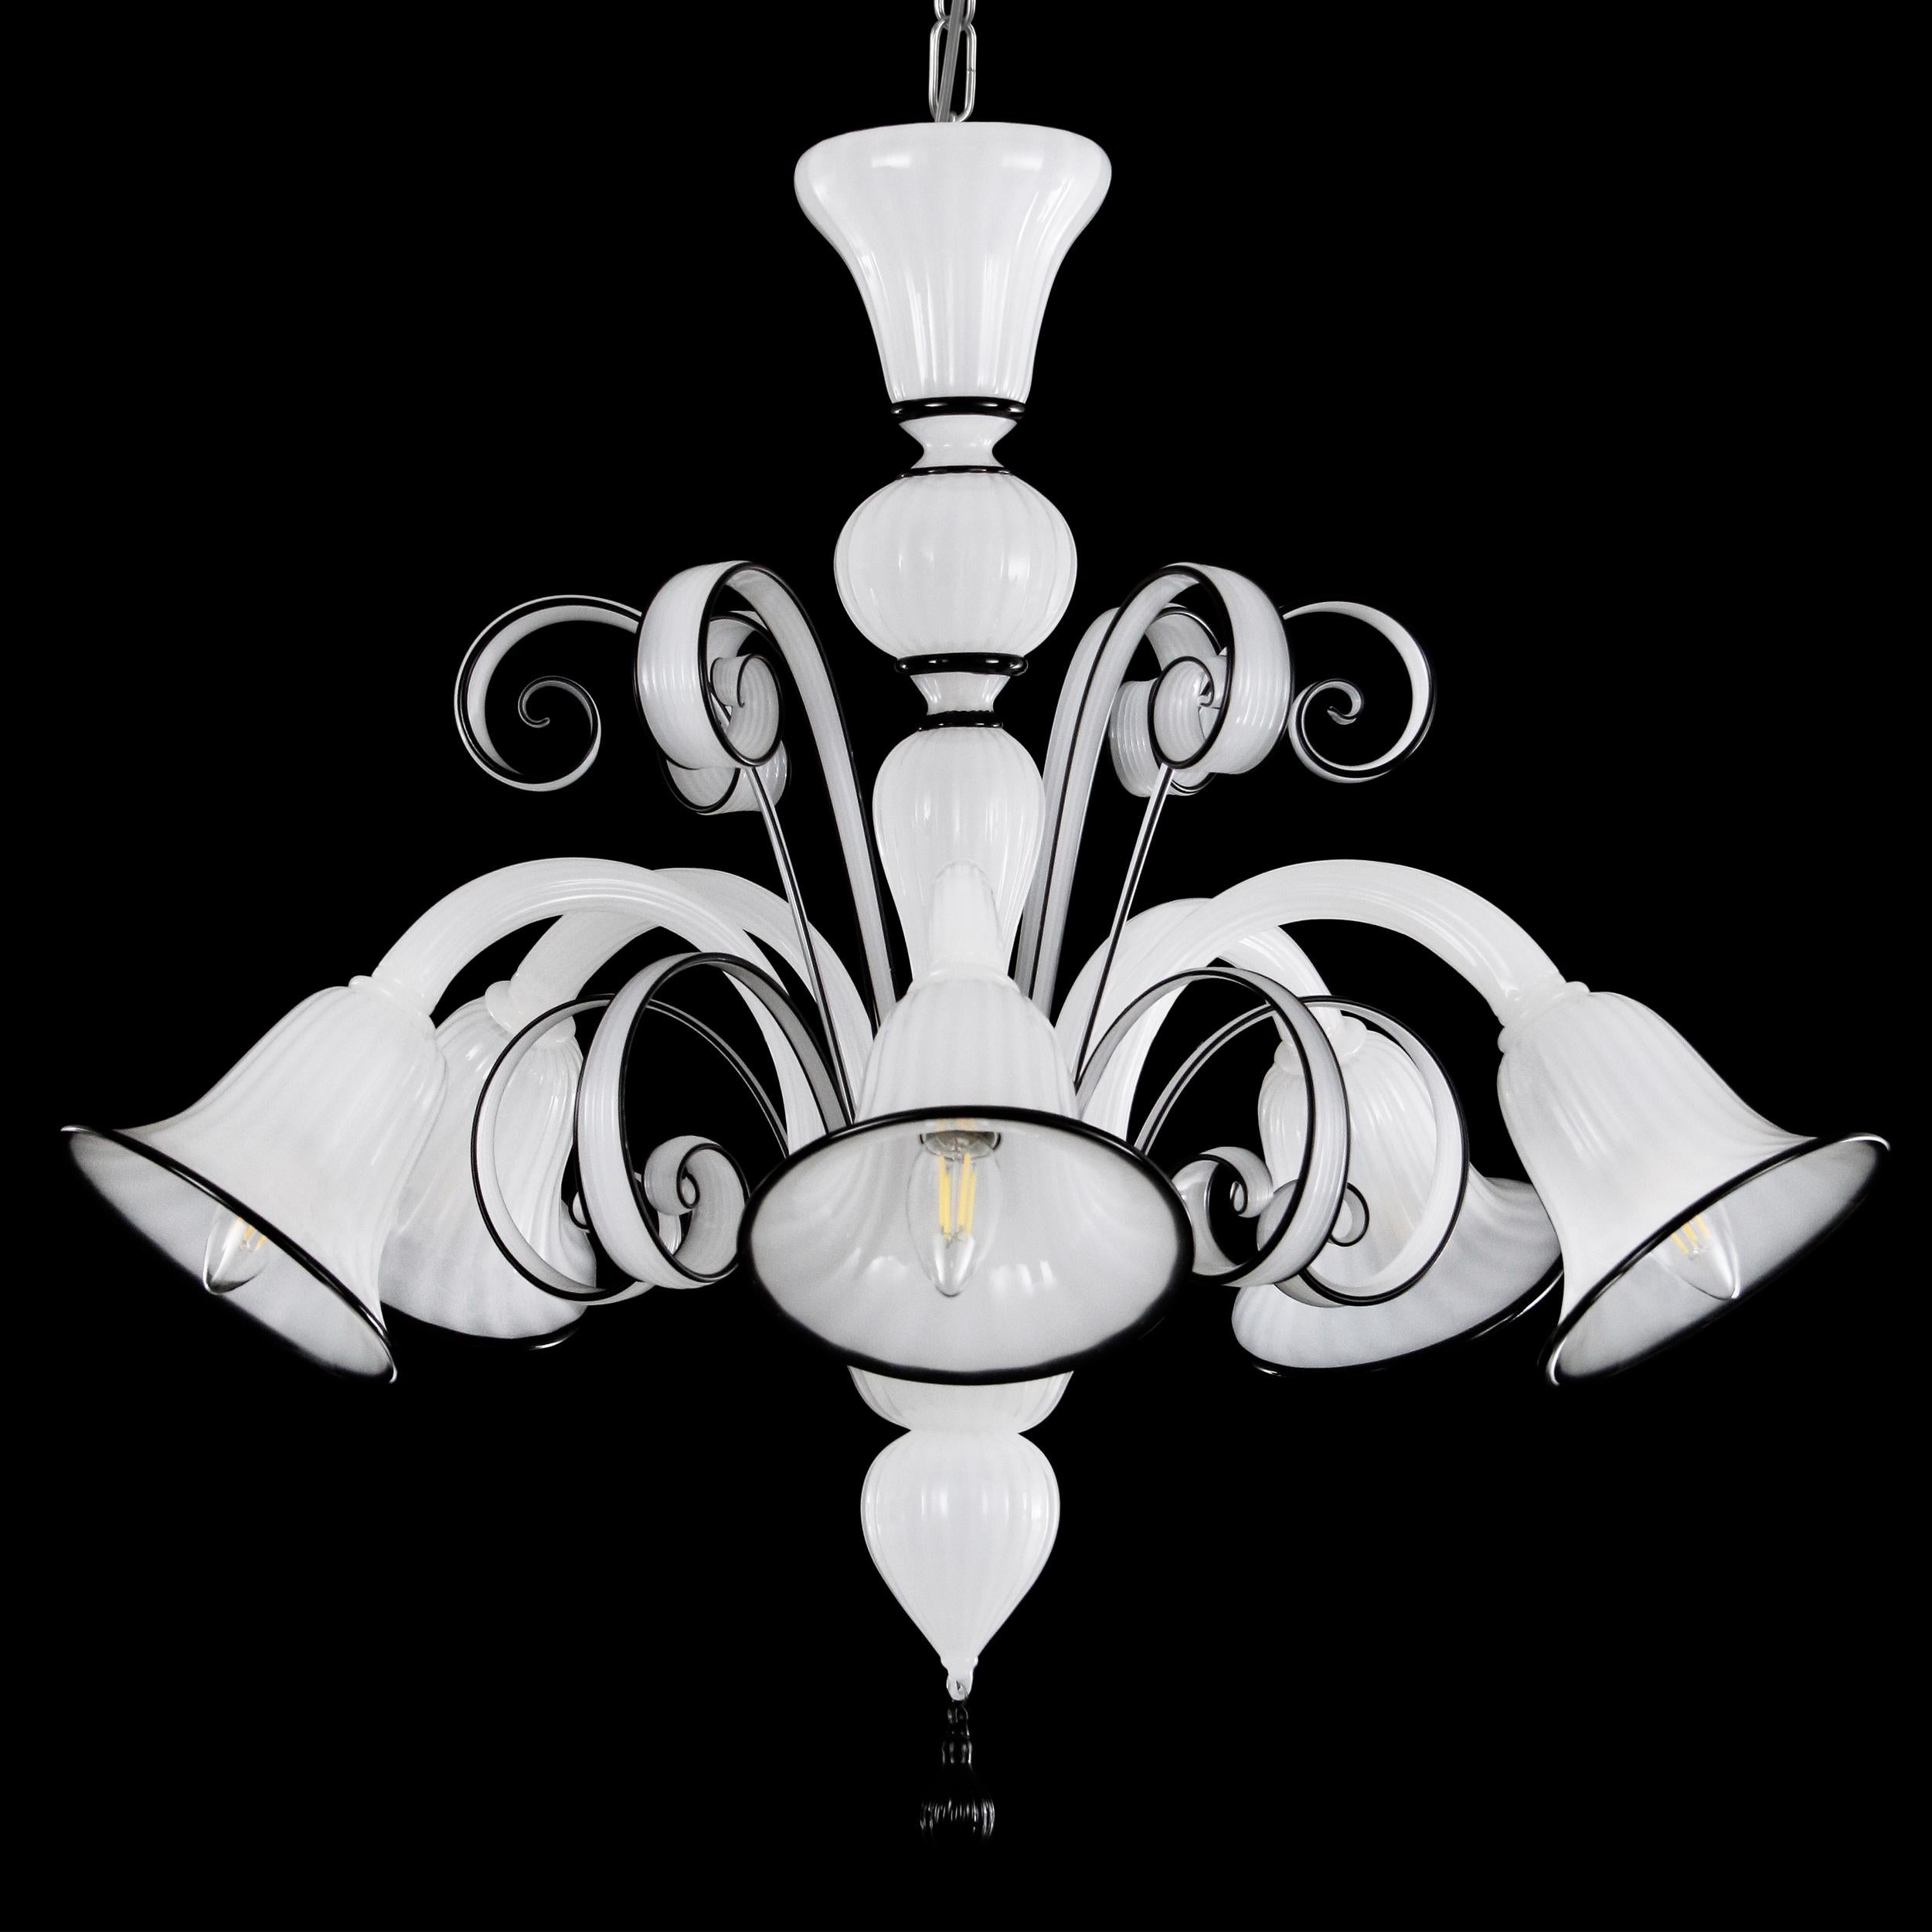 Capriccio chandelier, 5 lights, in white artistic glass, with curly ornamental elements and black details by Multiforme.
Inspired by the Classic Venetian tradition it is characterised by a central column where many blown glass “pastoral” elements